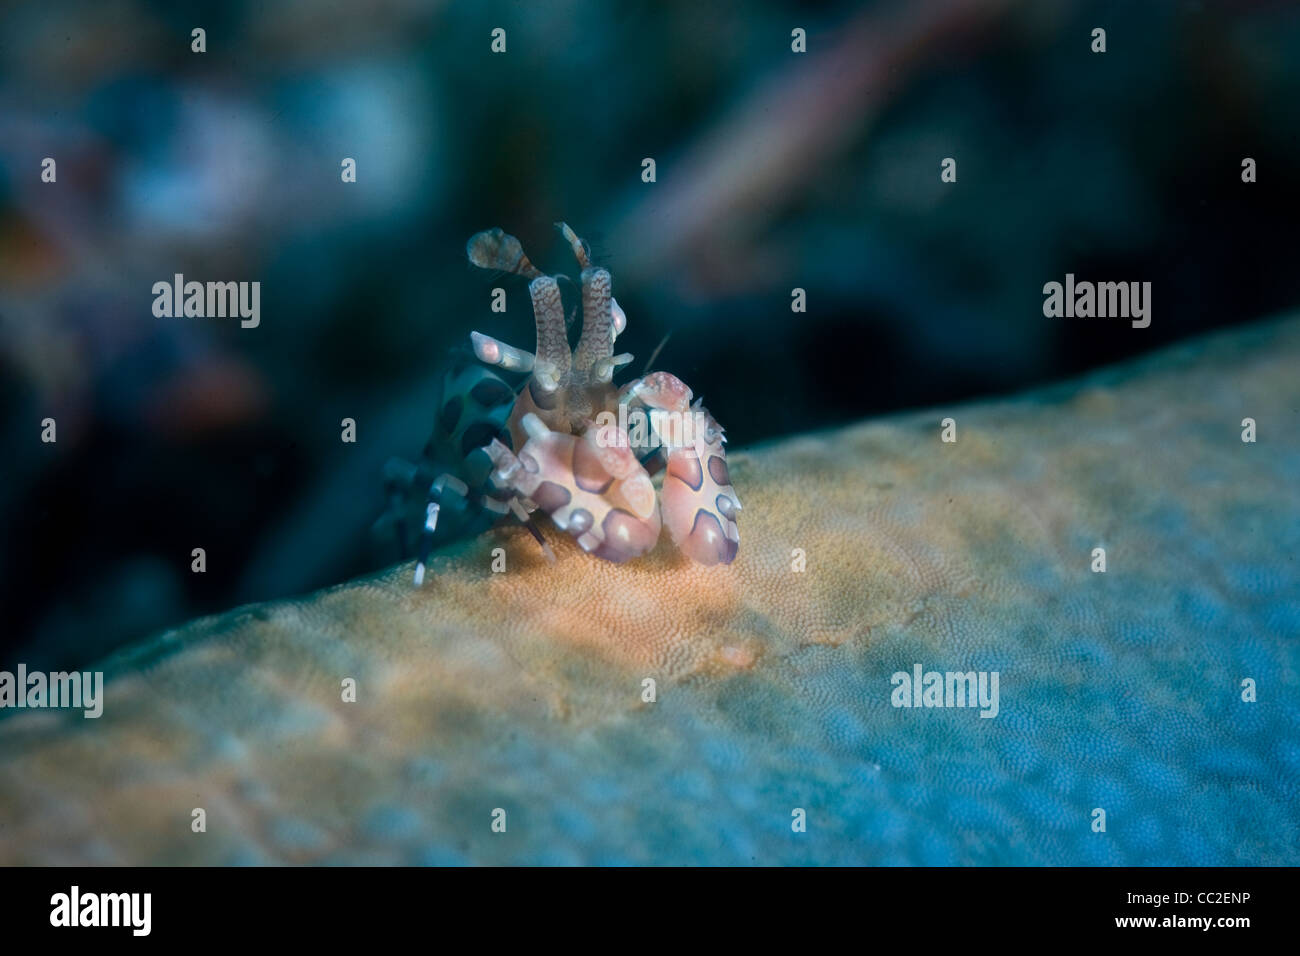 A tiny Harlequin shrimp (Hymenocera elegans) sits on top of a blue seastar (Linkia laevigata) which it will feed on. Stock Photo